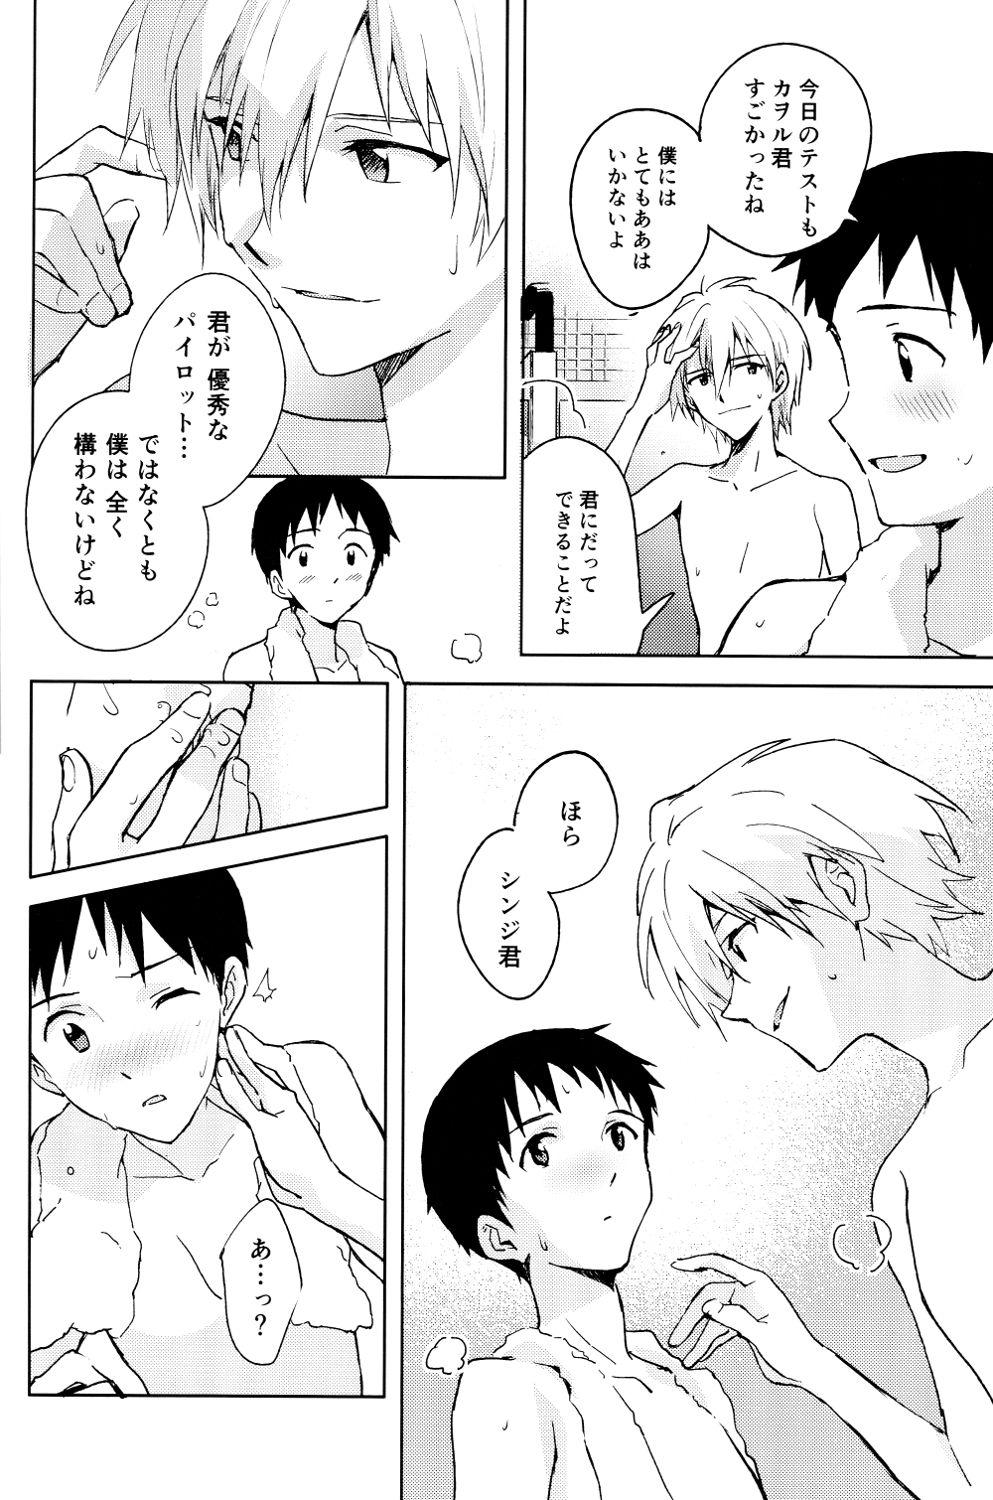 Lover FLY ME TO THE MOON - Neon genesis evangelion Athletic - Page 12